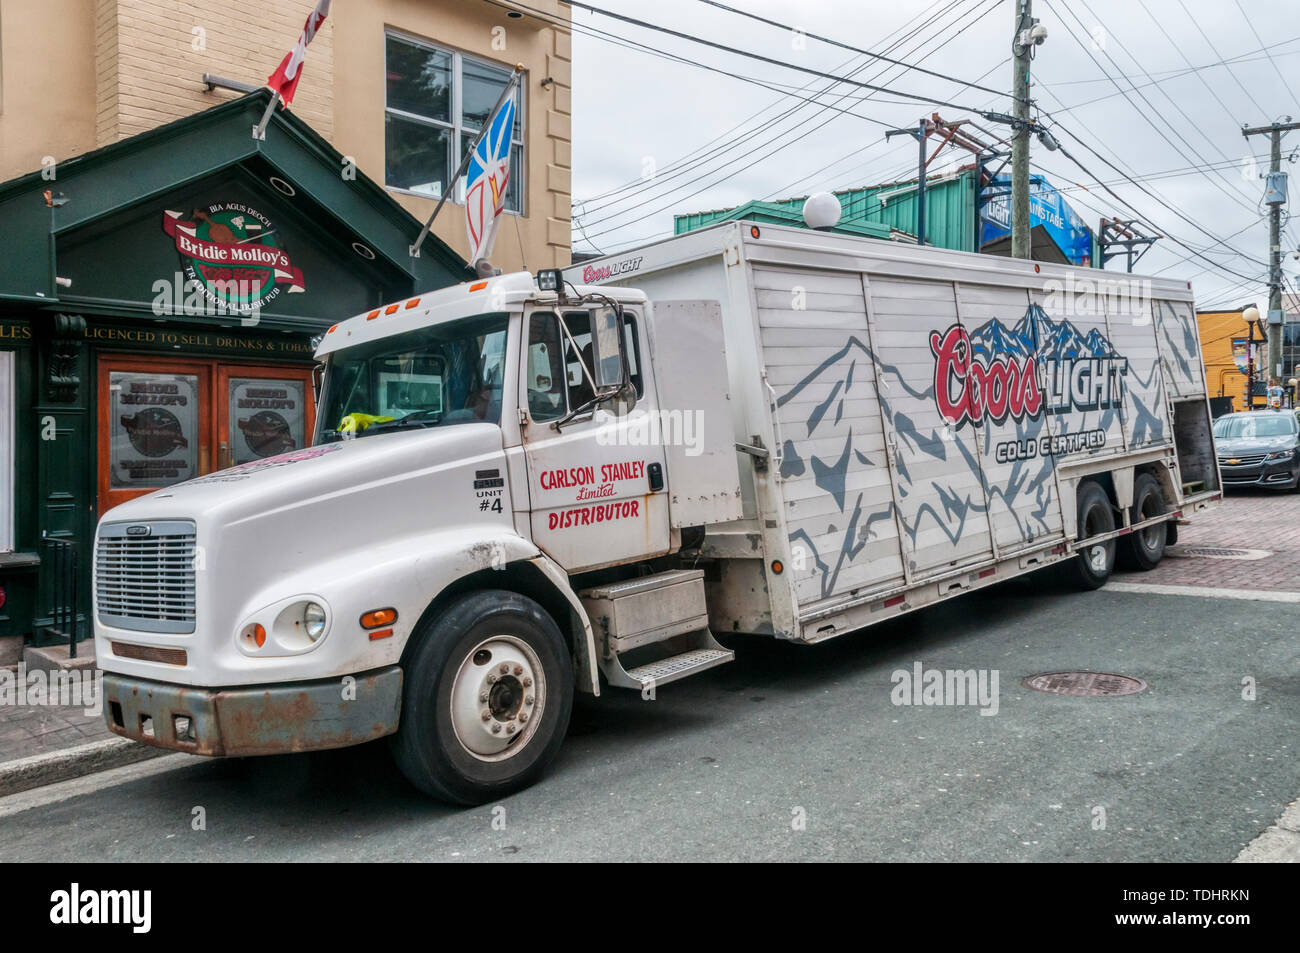 A Coors Light delivery truck outside Bridie Molloy's Irish pub in St John's, Newfoundland. Stock Photo